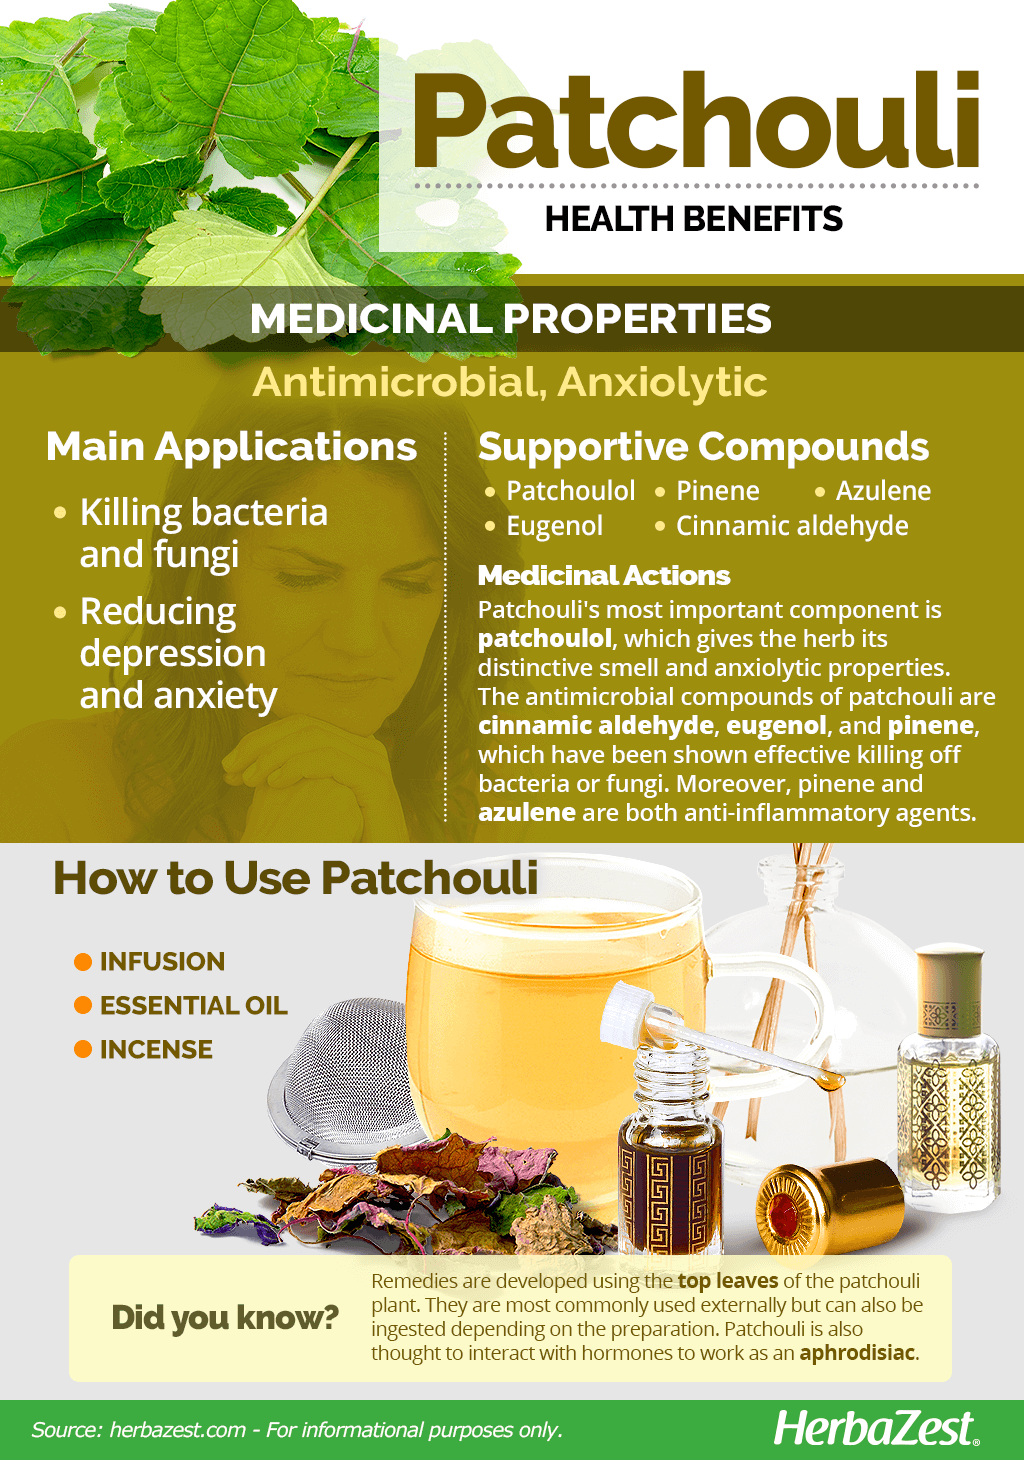 All About Patchouli